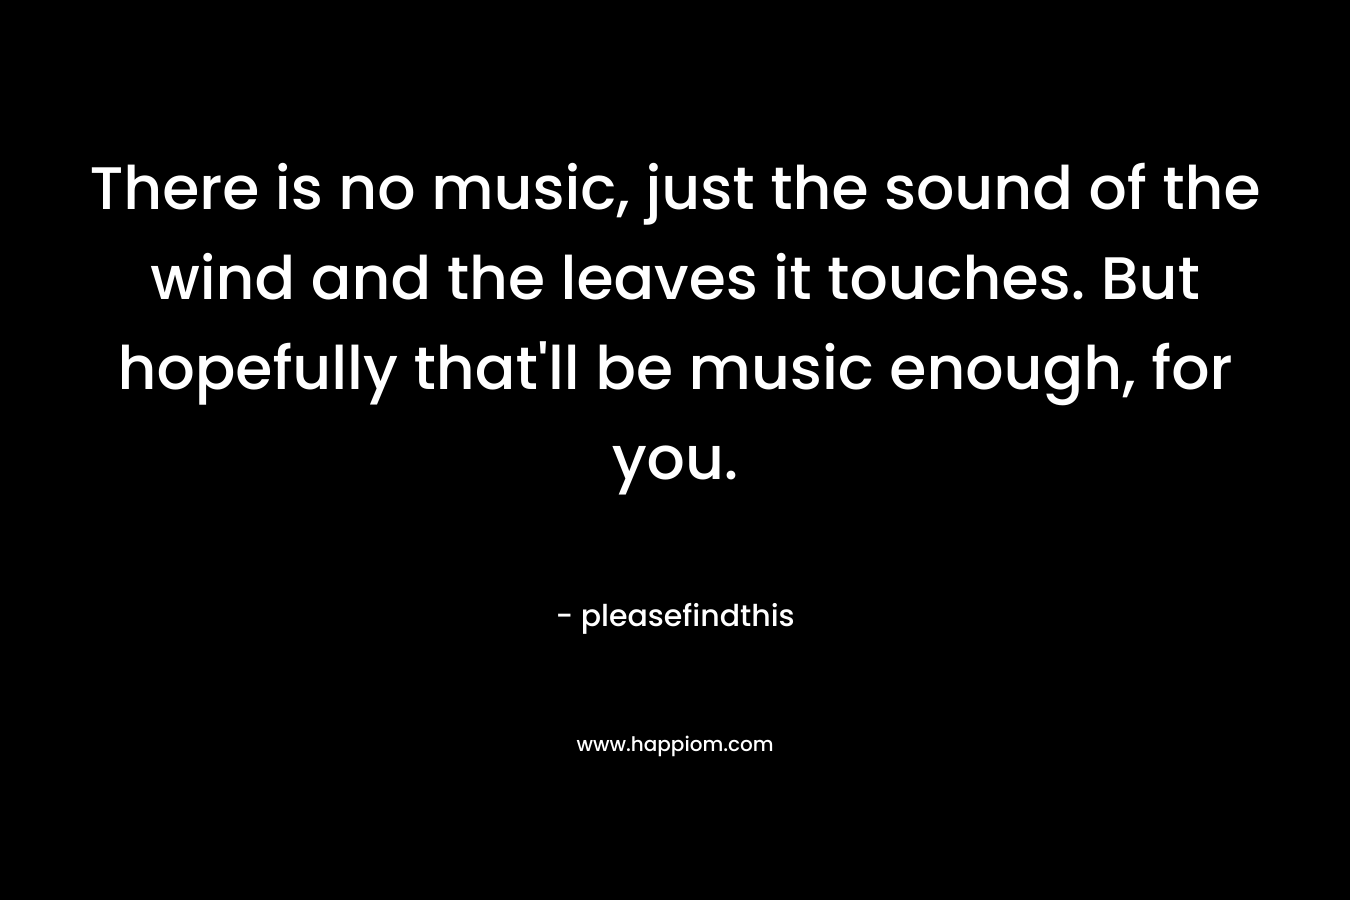 There is no music, just the sound of the wind and the leaves it touches. But hopefully that’ll be music enough, for you. – pleasefindthis